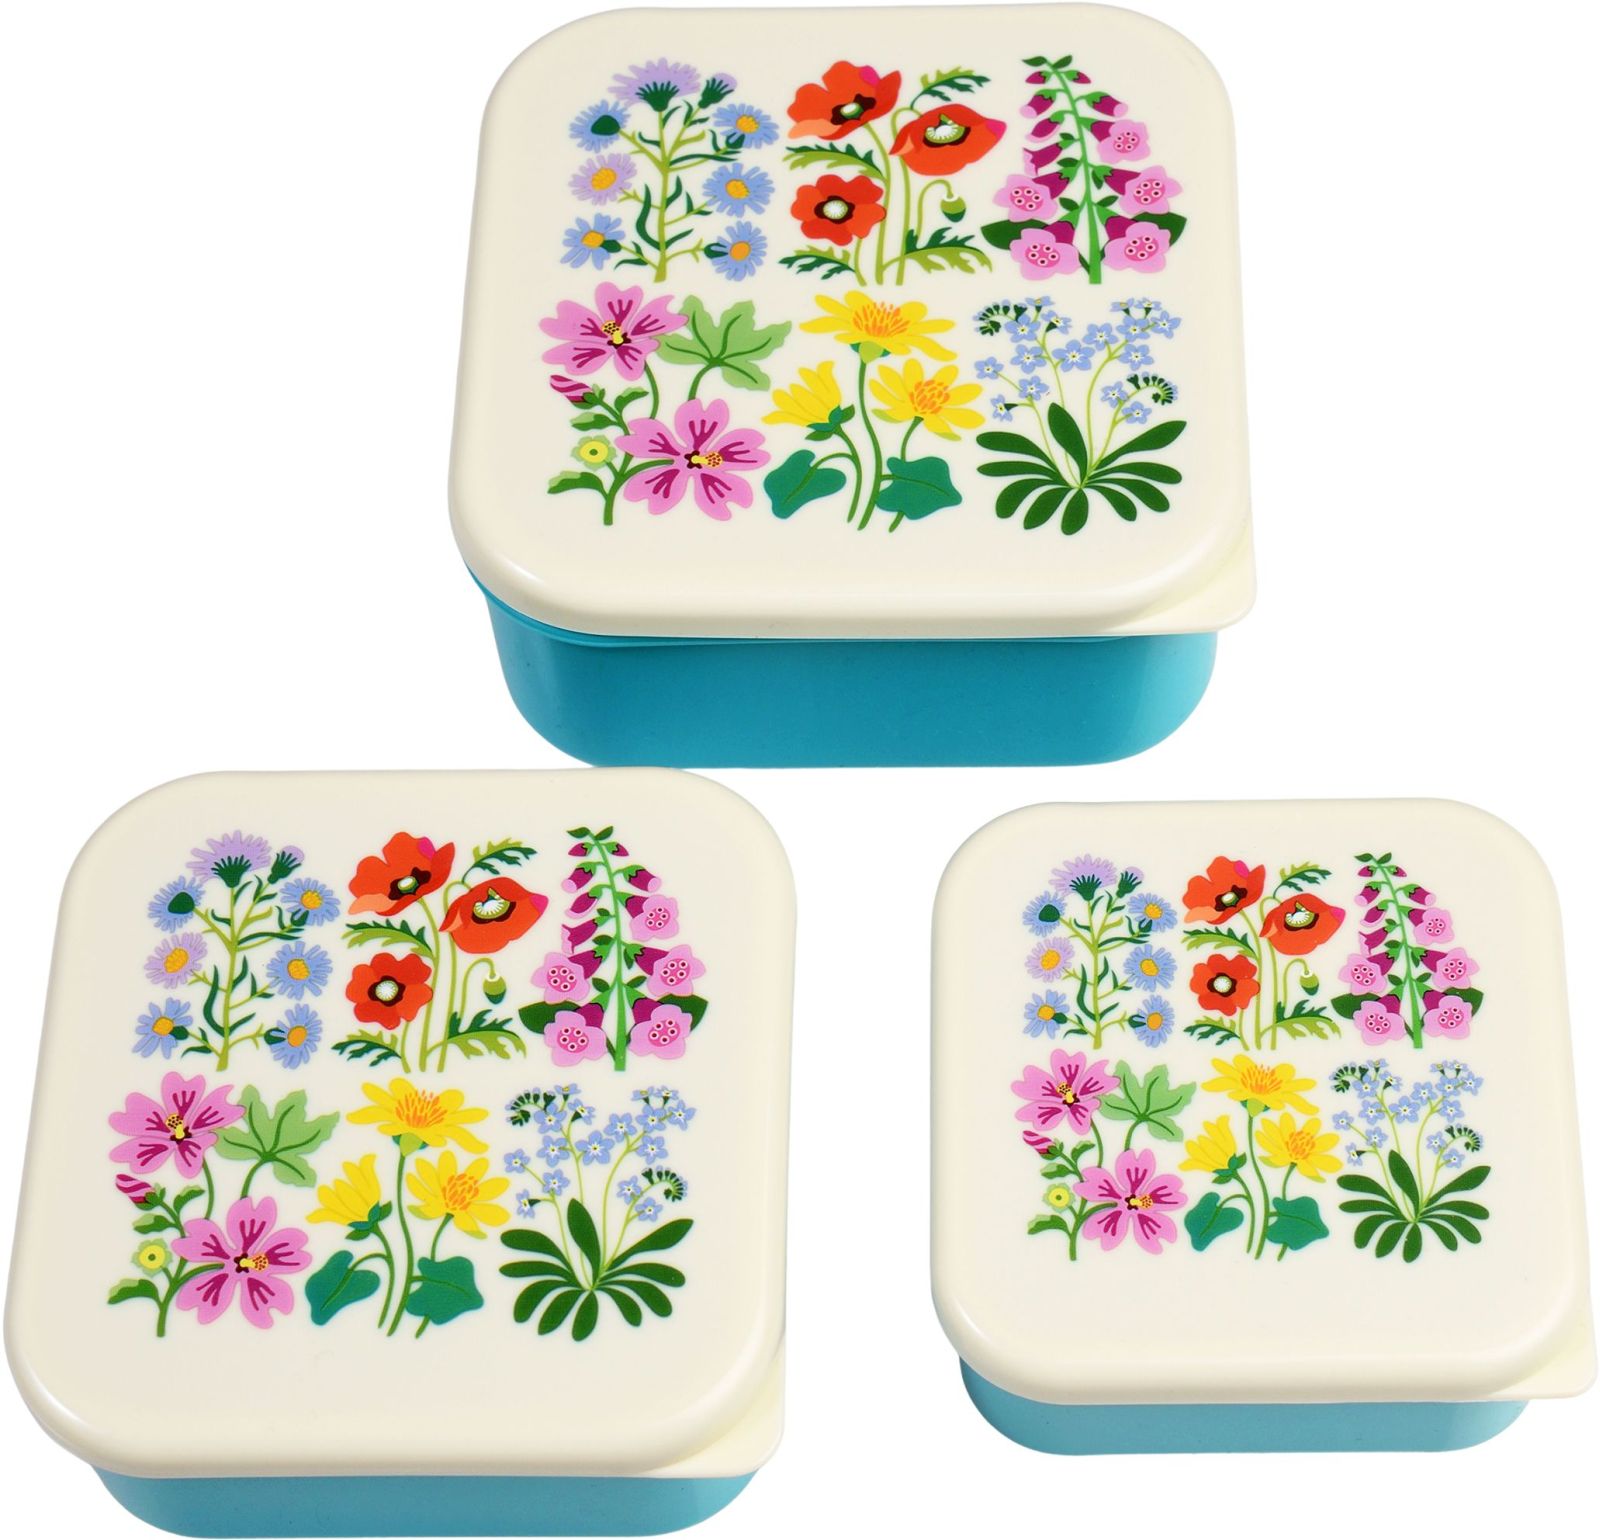 Rex London Snack boxes (set of 3) - Wild Flowers